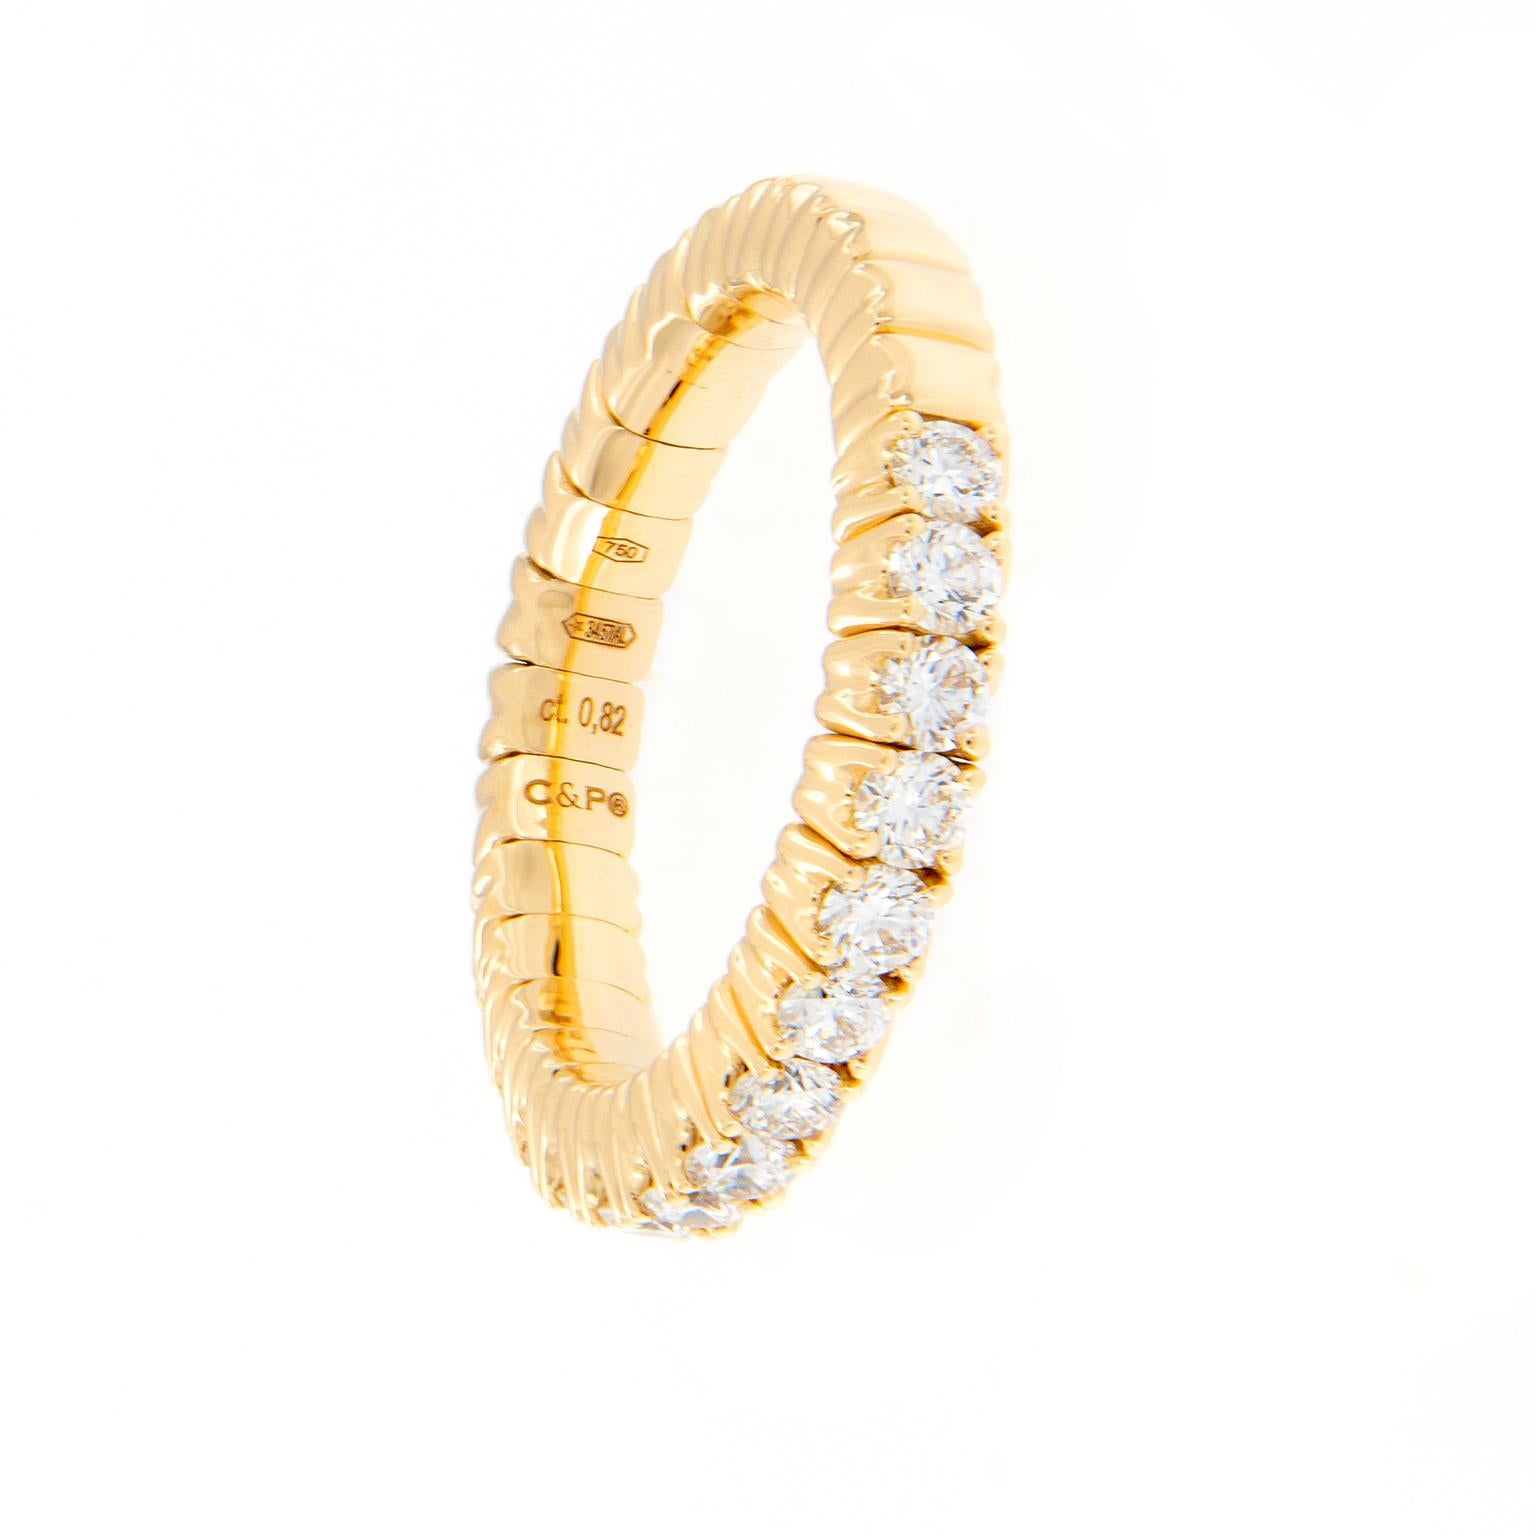 This beautiful stretchable diamond band ring is designed for comfort and perfectly fits one’s finger. It evens works on those with larger knuckles! The ring is crafted in 18k yellow gold and features 15 round brilliant cut diamonds. Band can stretch